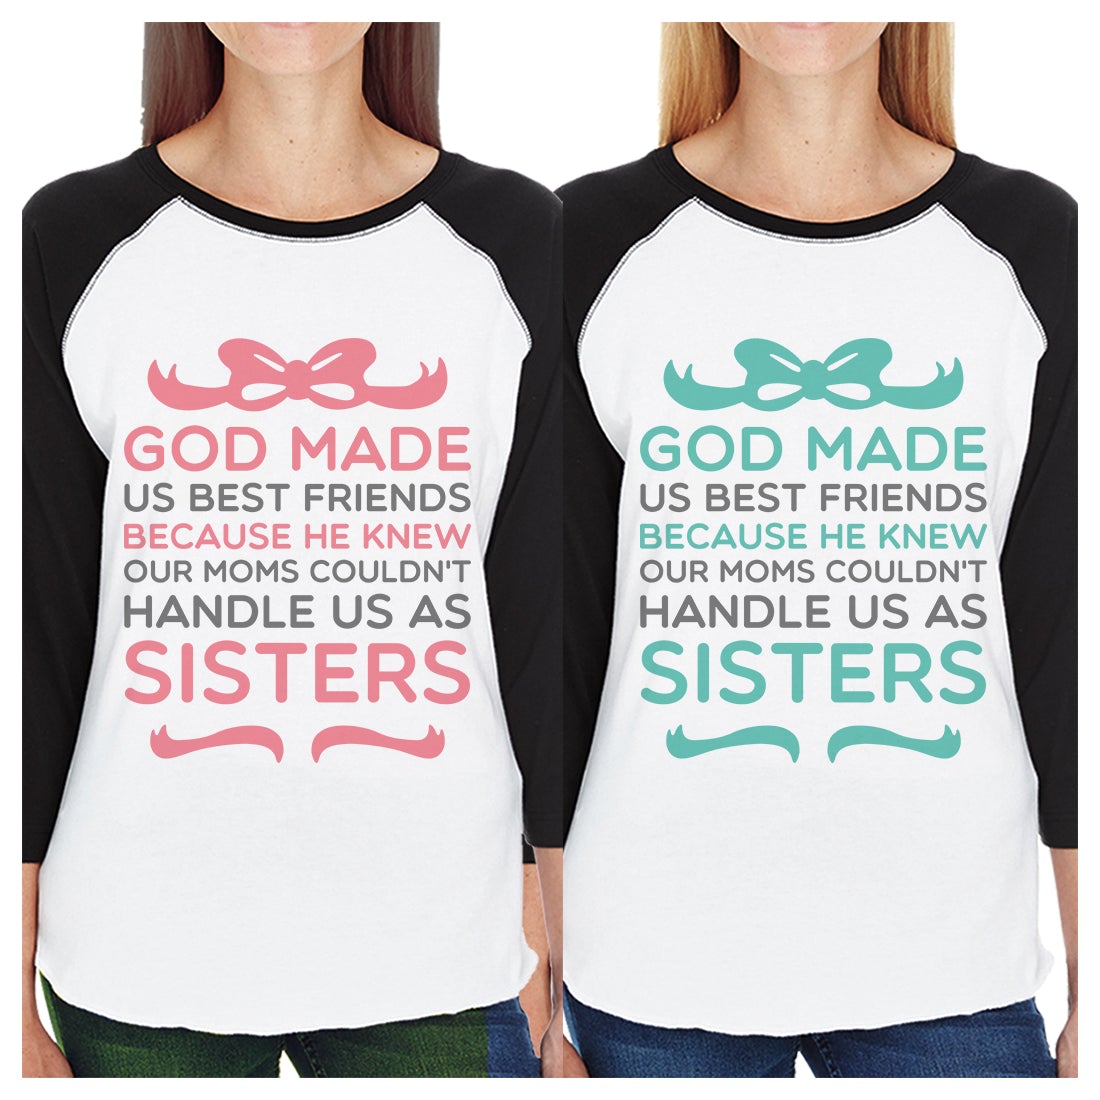 God Made Us Sister Matching Baseball Jerseys Funny Best Friend Gift Black and White